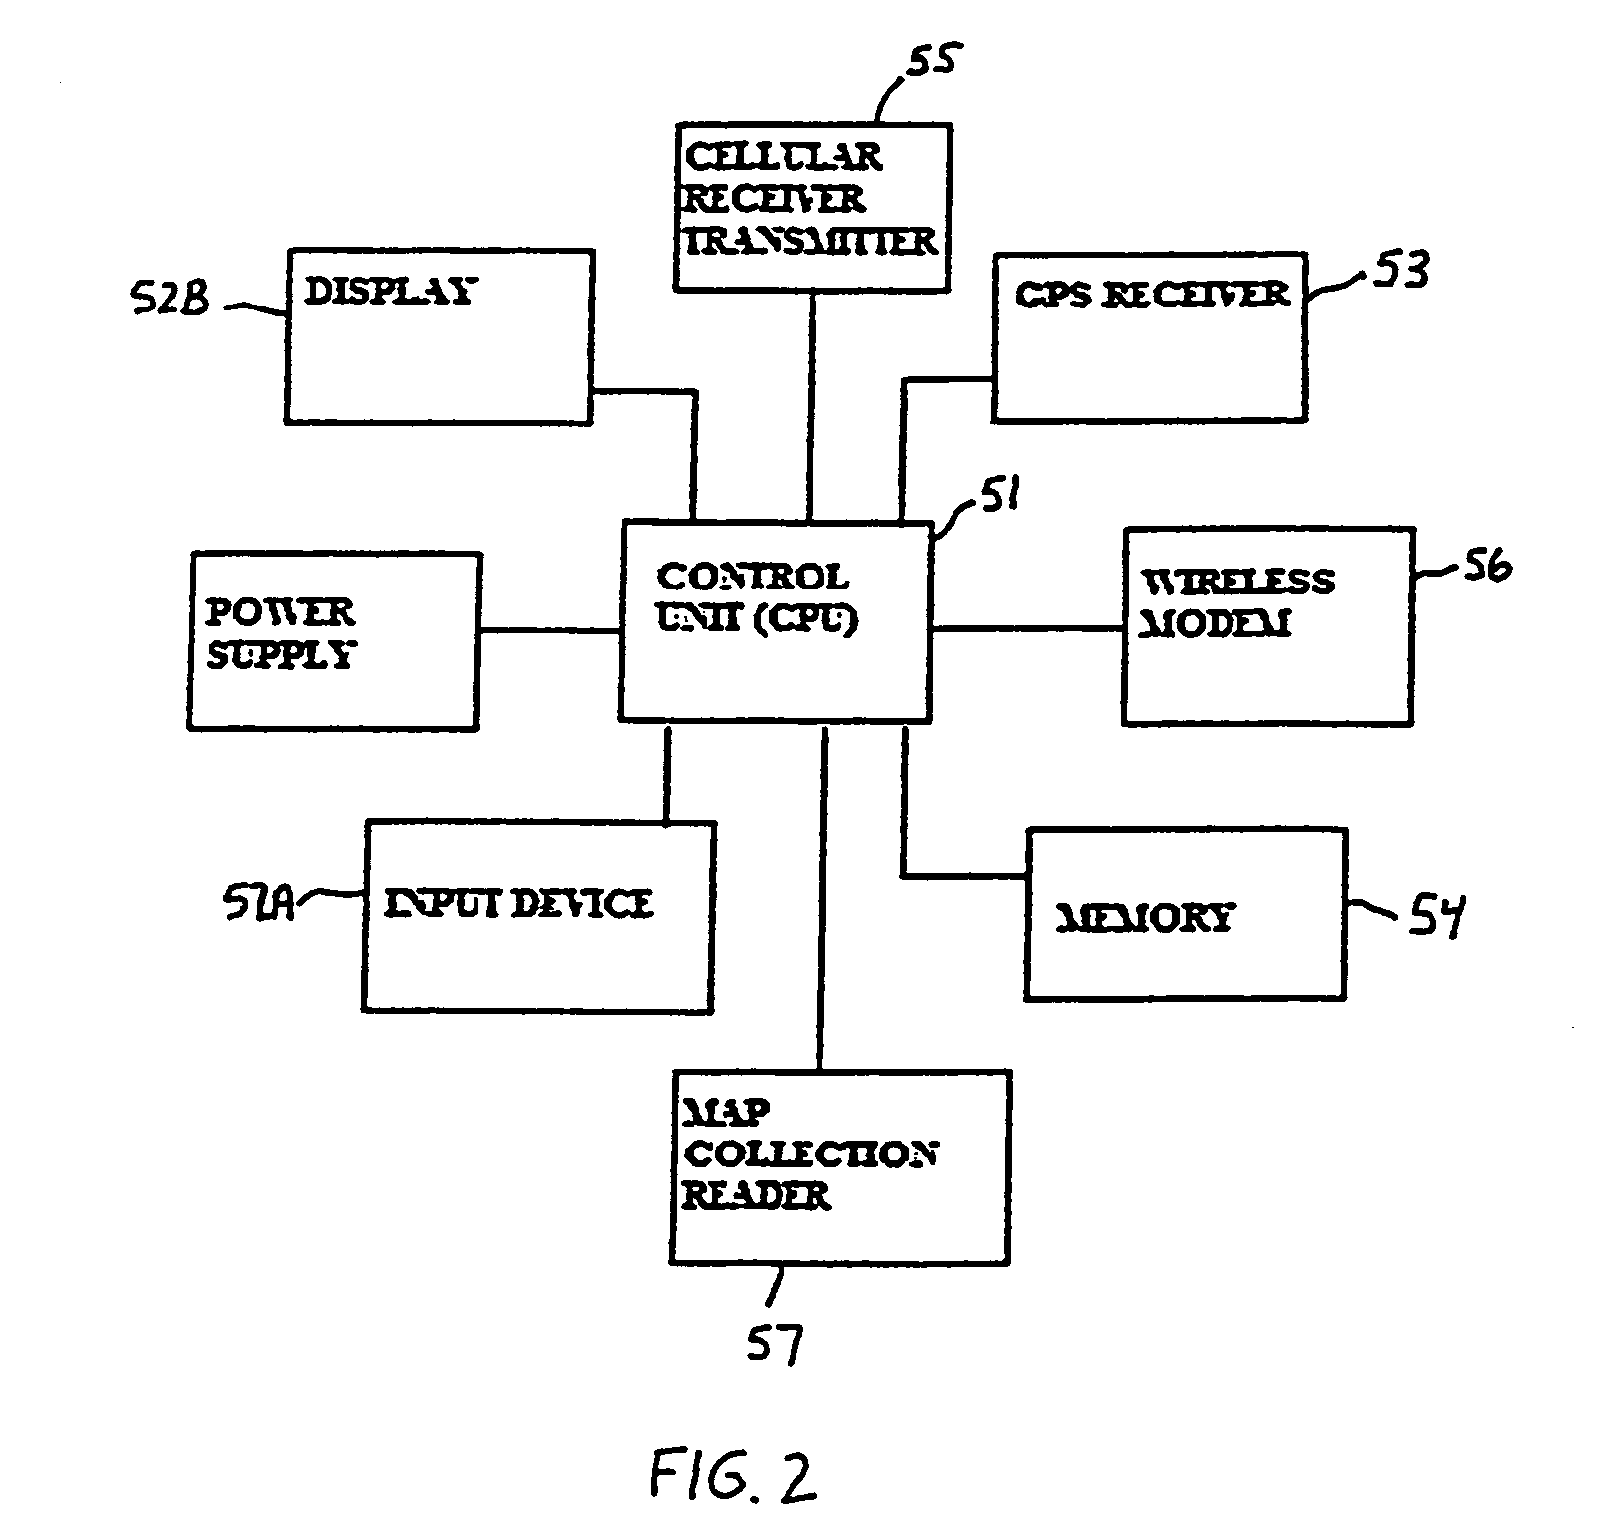 System and method for providing location-based information to mobile consumers